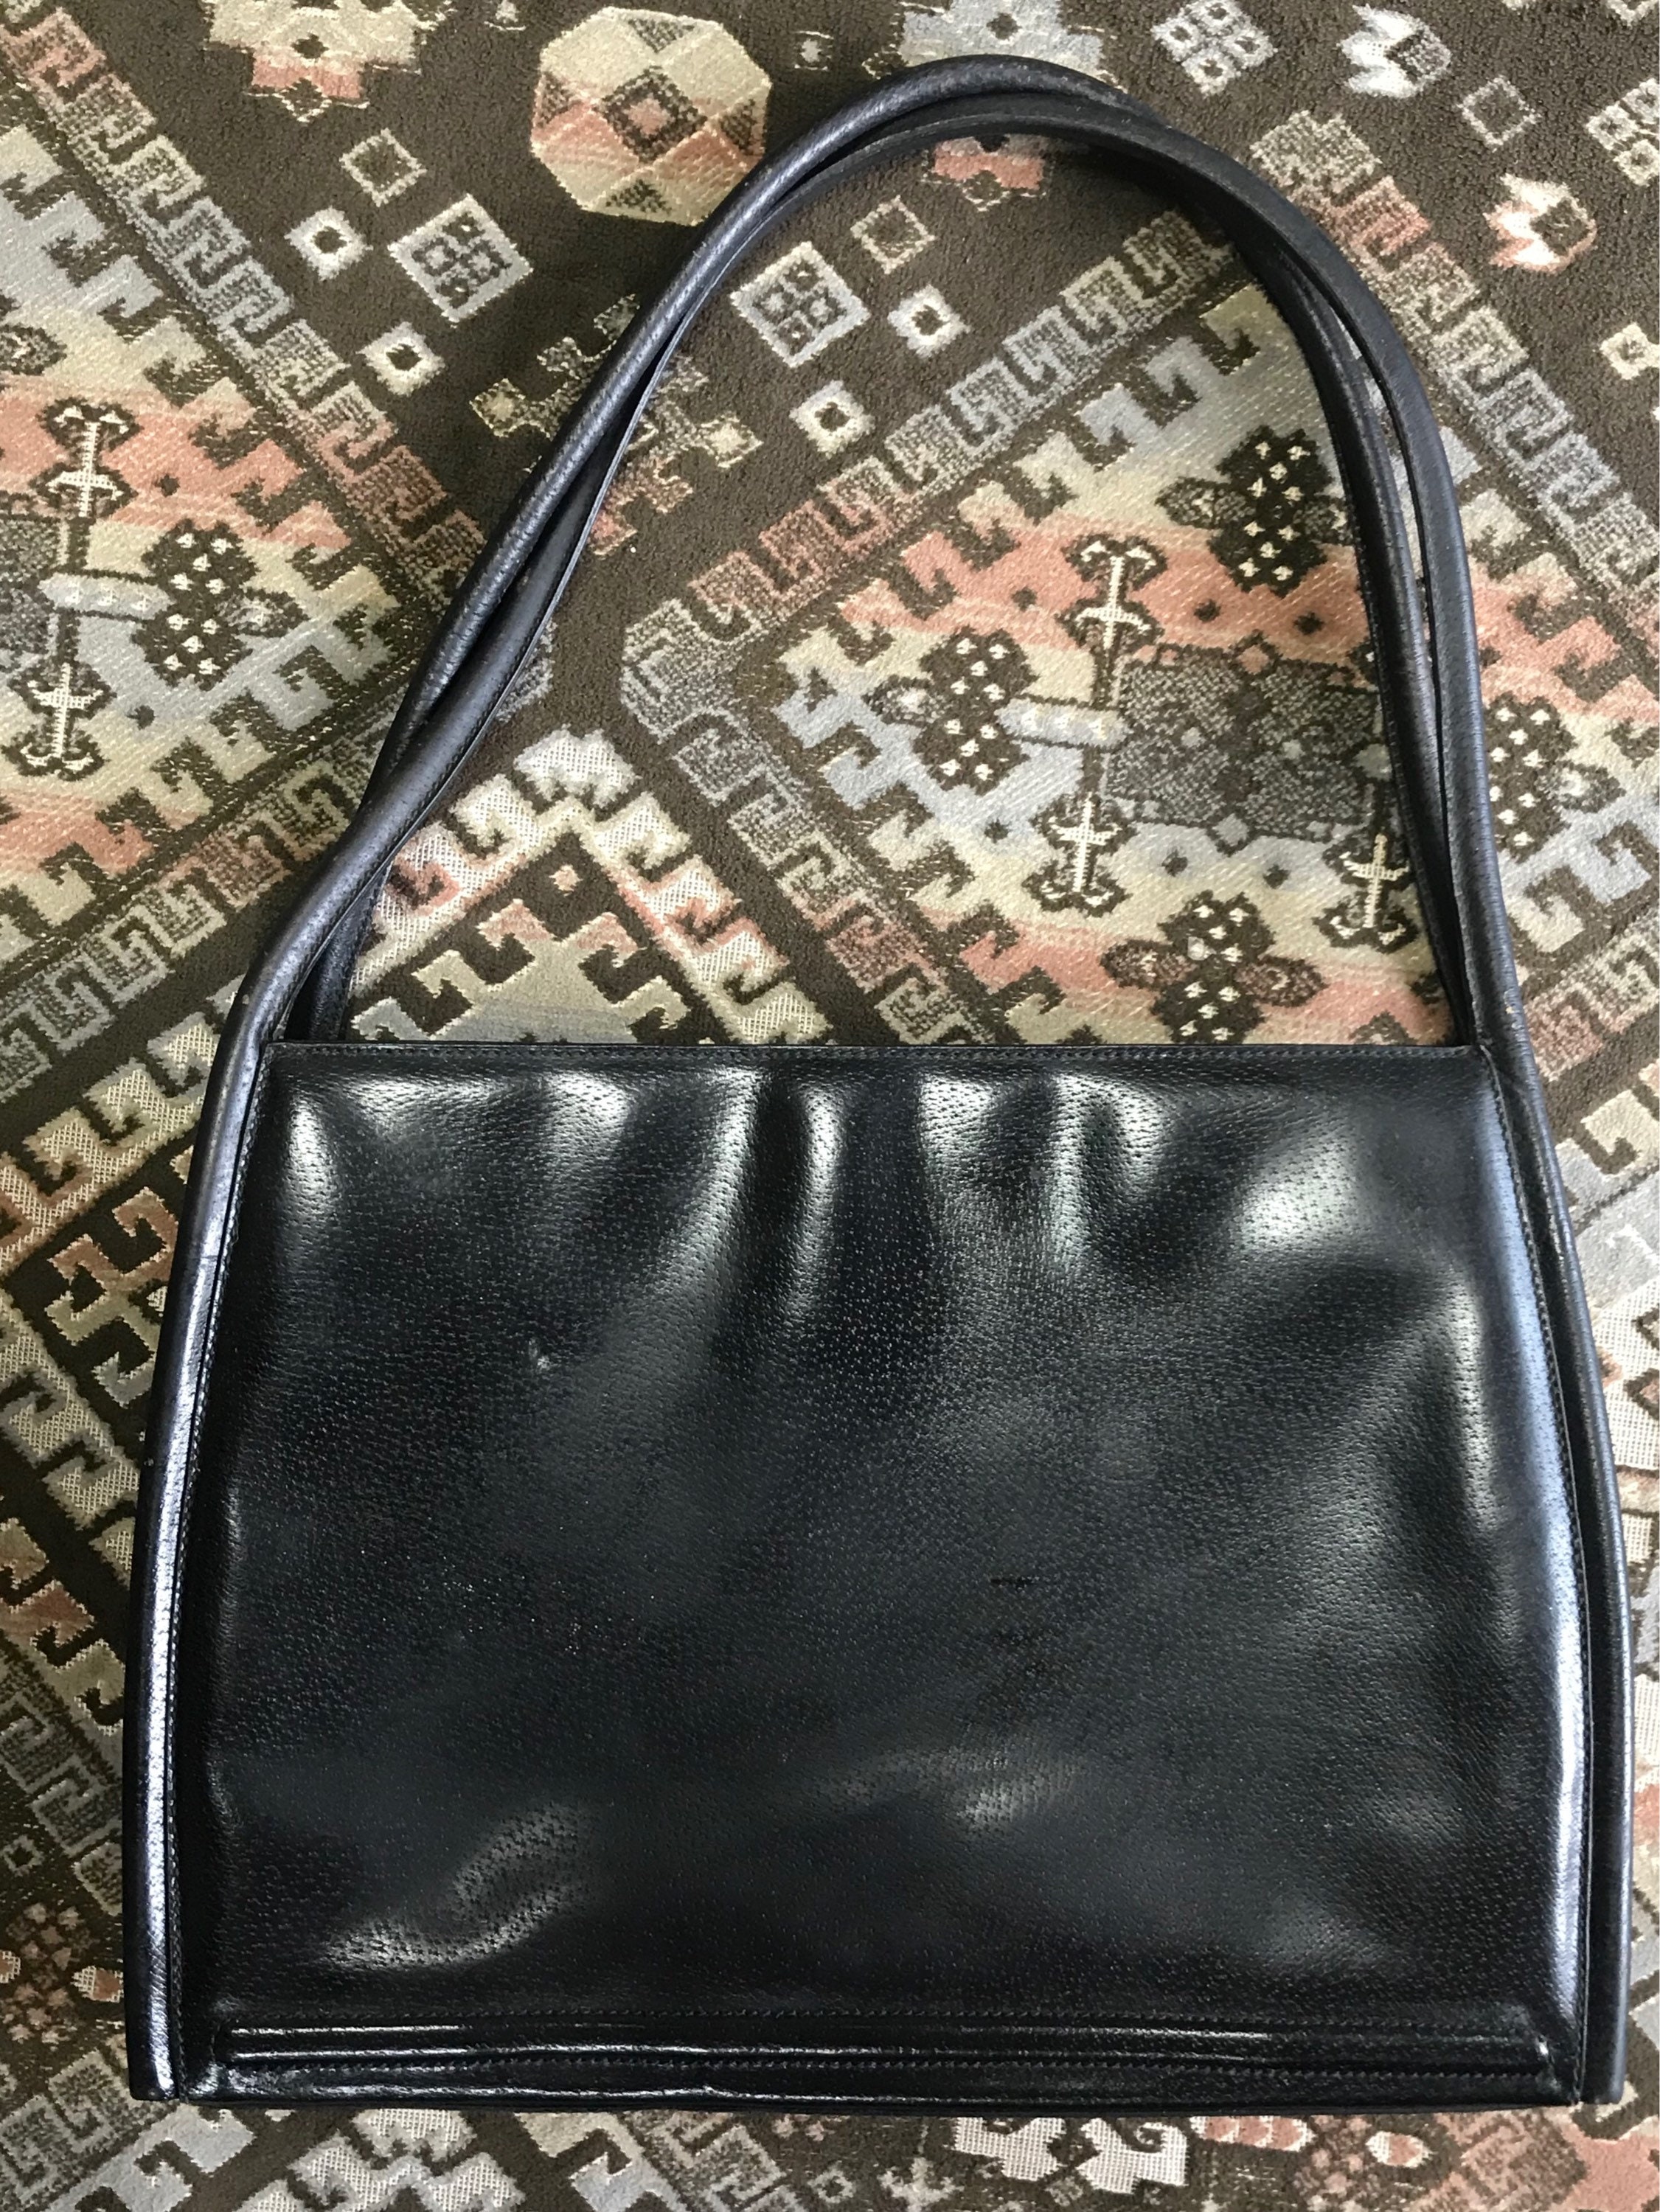 Vintage Gucci Black Pigskin Large Trapezoid Shape Shoulder Bag with Embossed GG Mark. Classic Leather Purse For Daily Use.